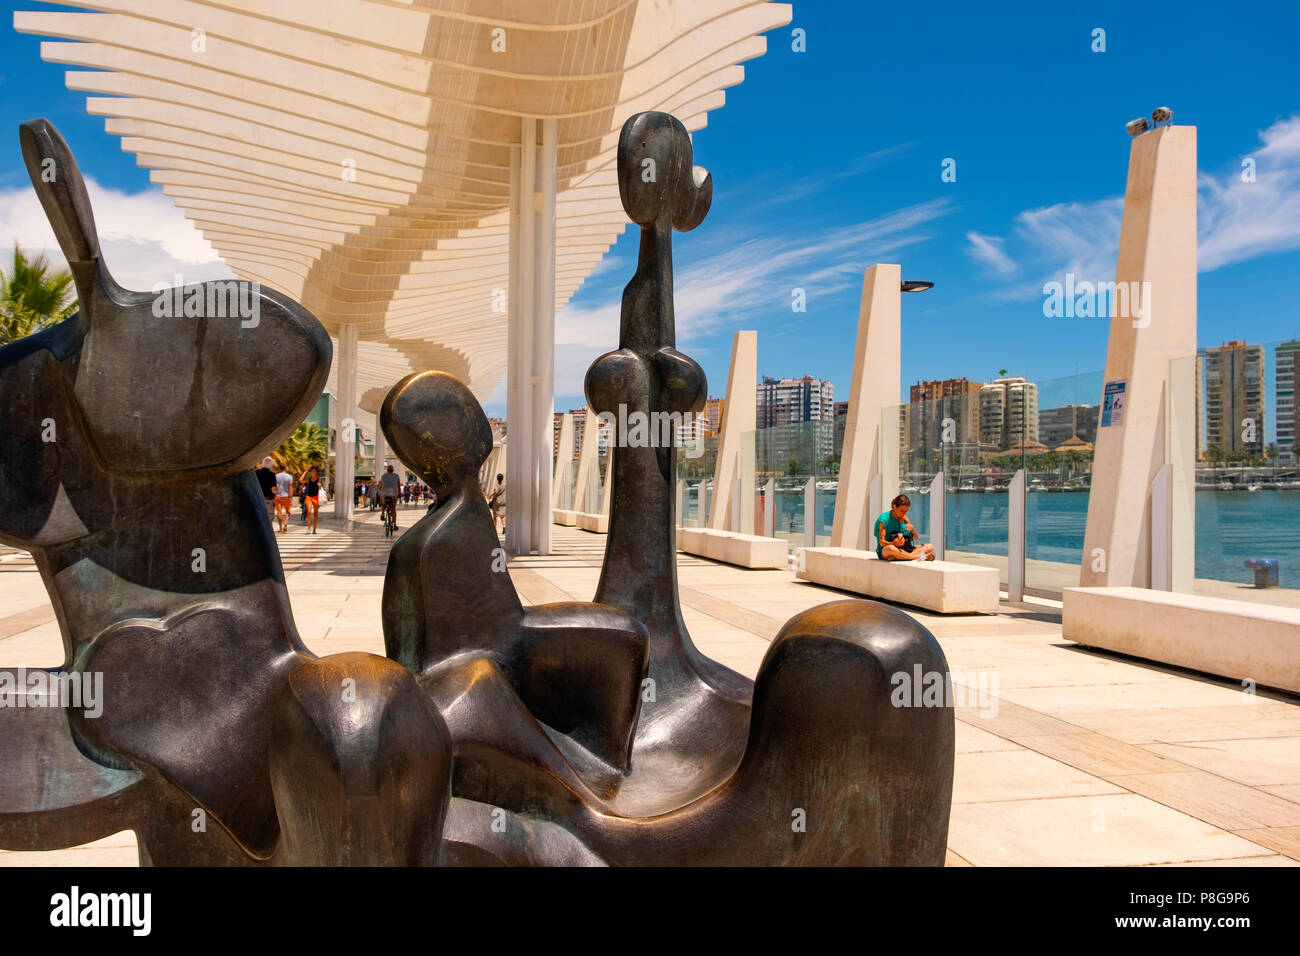 Modern sculptures. Muelle Uno. Dock One. Seaside promenade at port, Malaga city. Costa del Sol, Andalusia. Southern Spain Europe Stock Photo